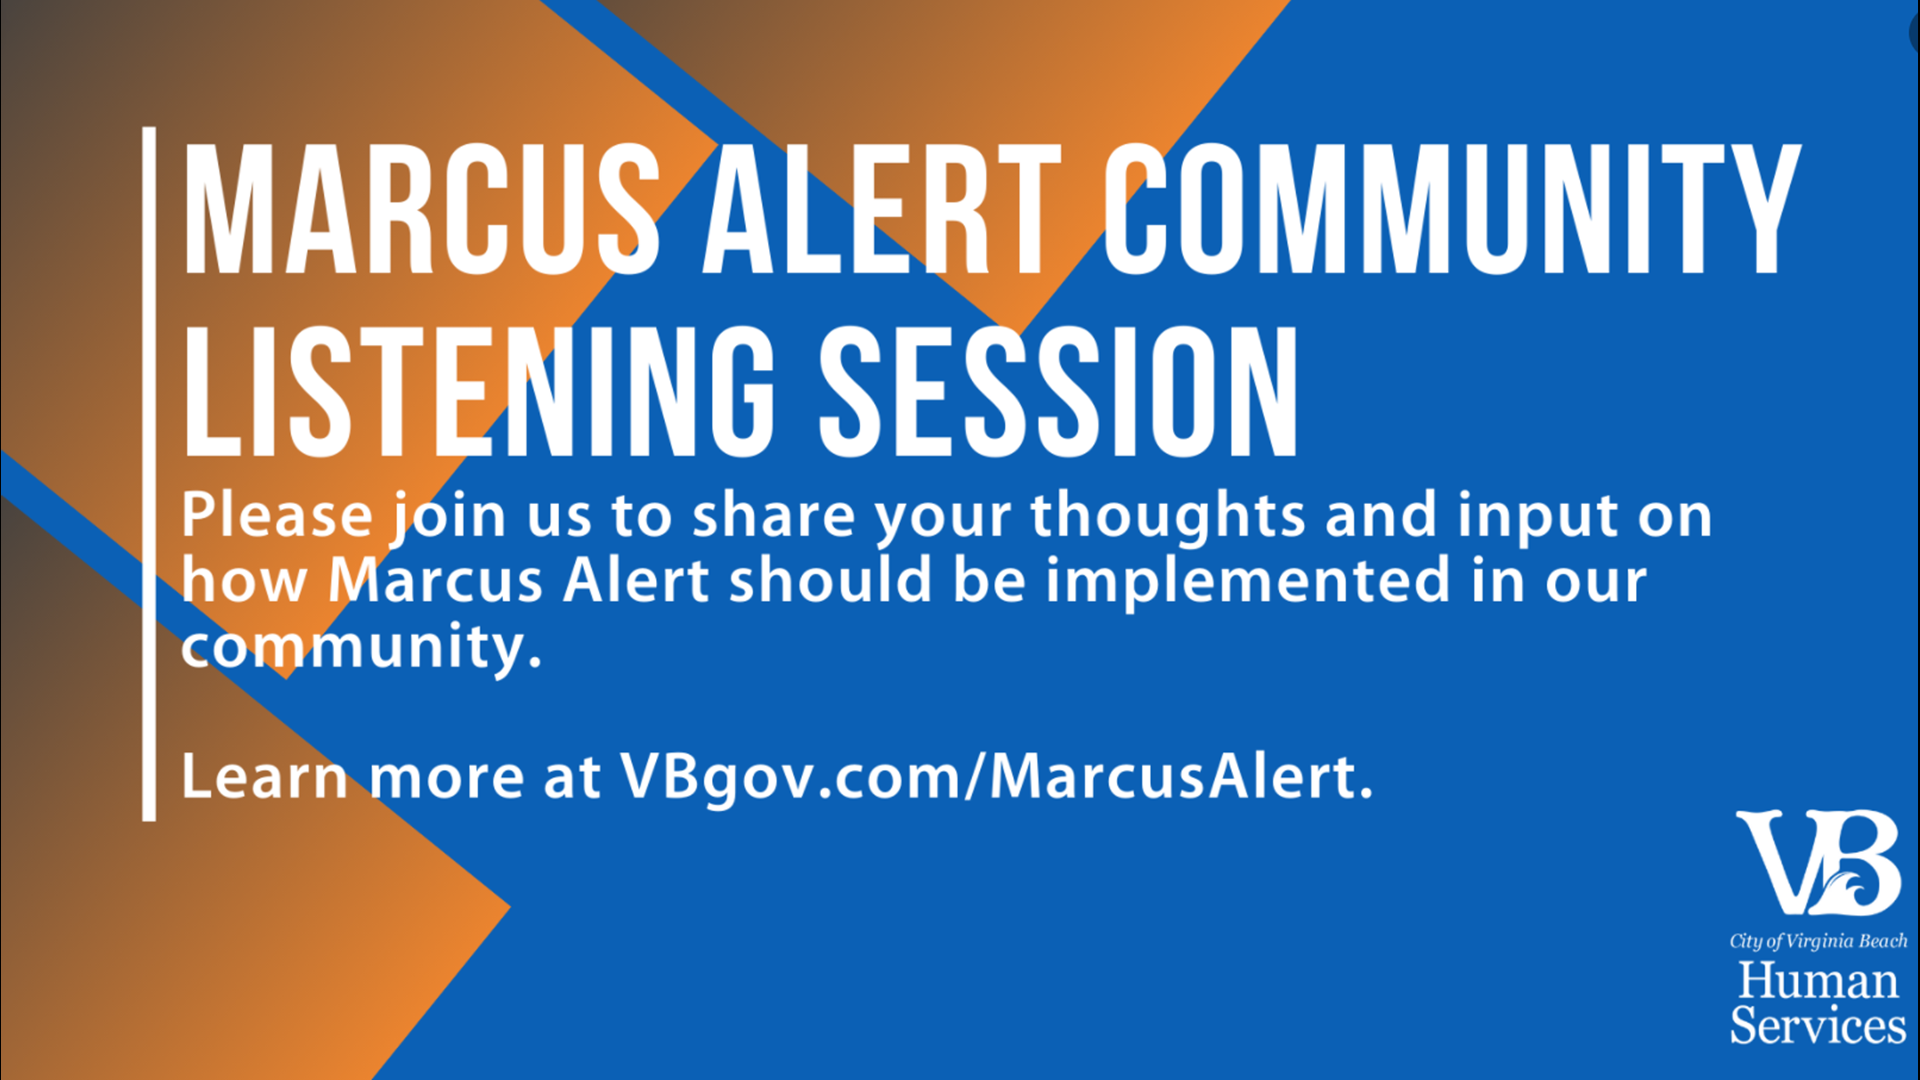 Virginia Beach City officials seeking public input on how to implement the 'Marcus Alert' system.